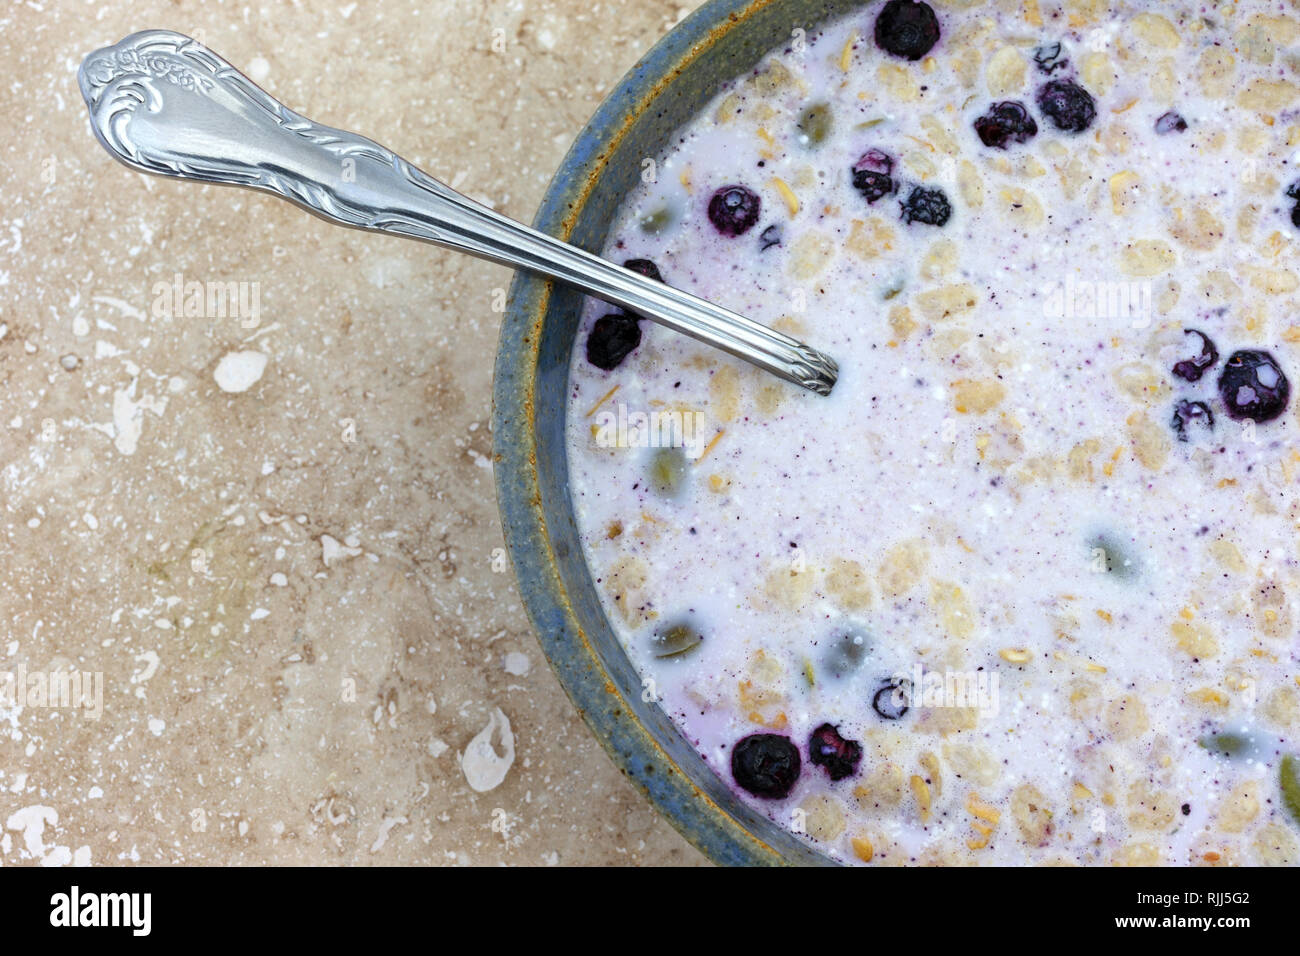 Top close view of organic breakfast cereal with milk dried blueberries and pumpkin seeds plus a spoon in the food on a marble table. Stock Photo